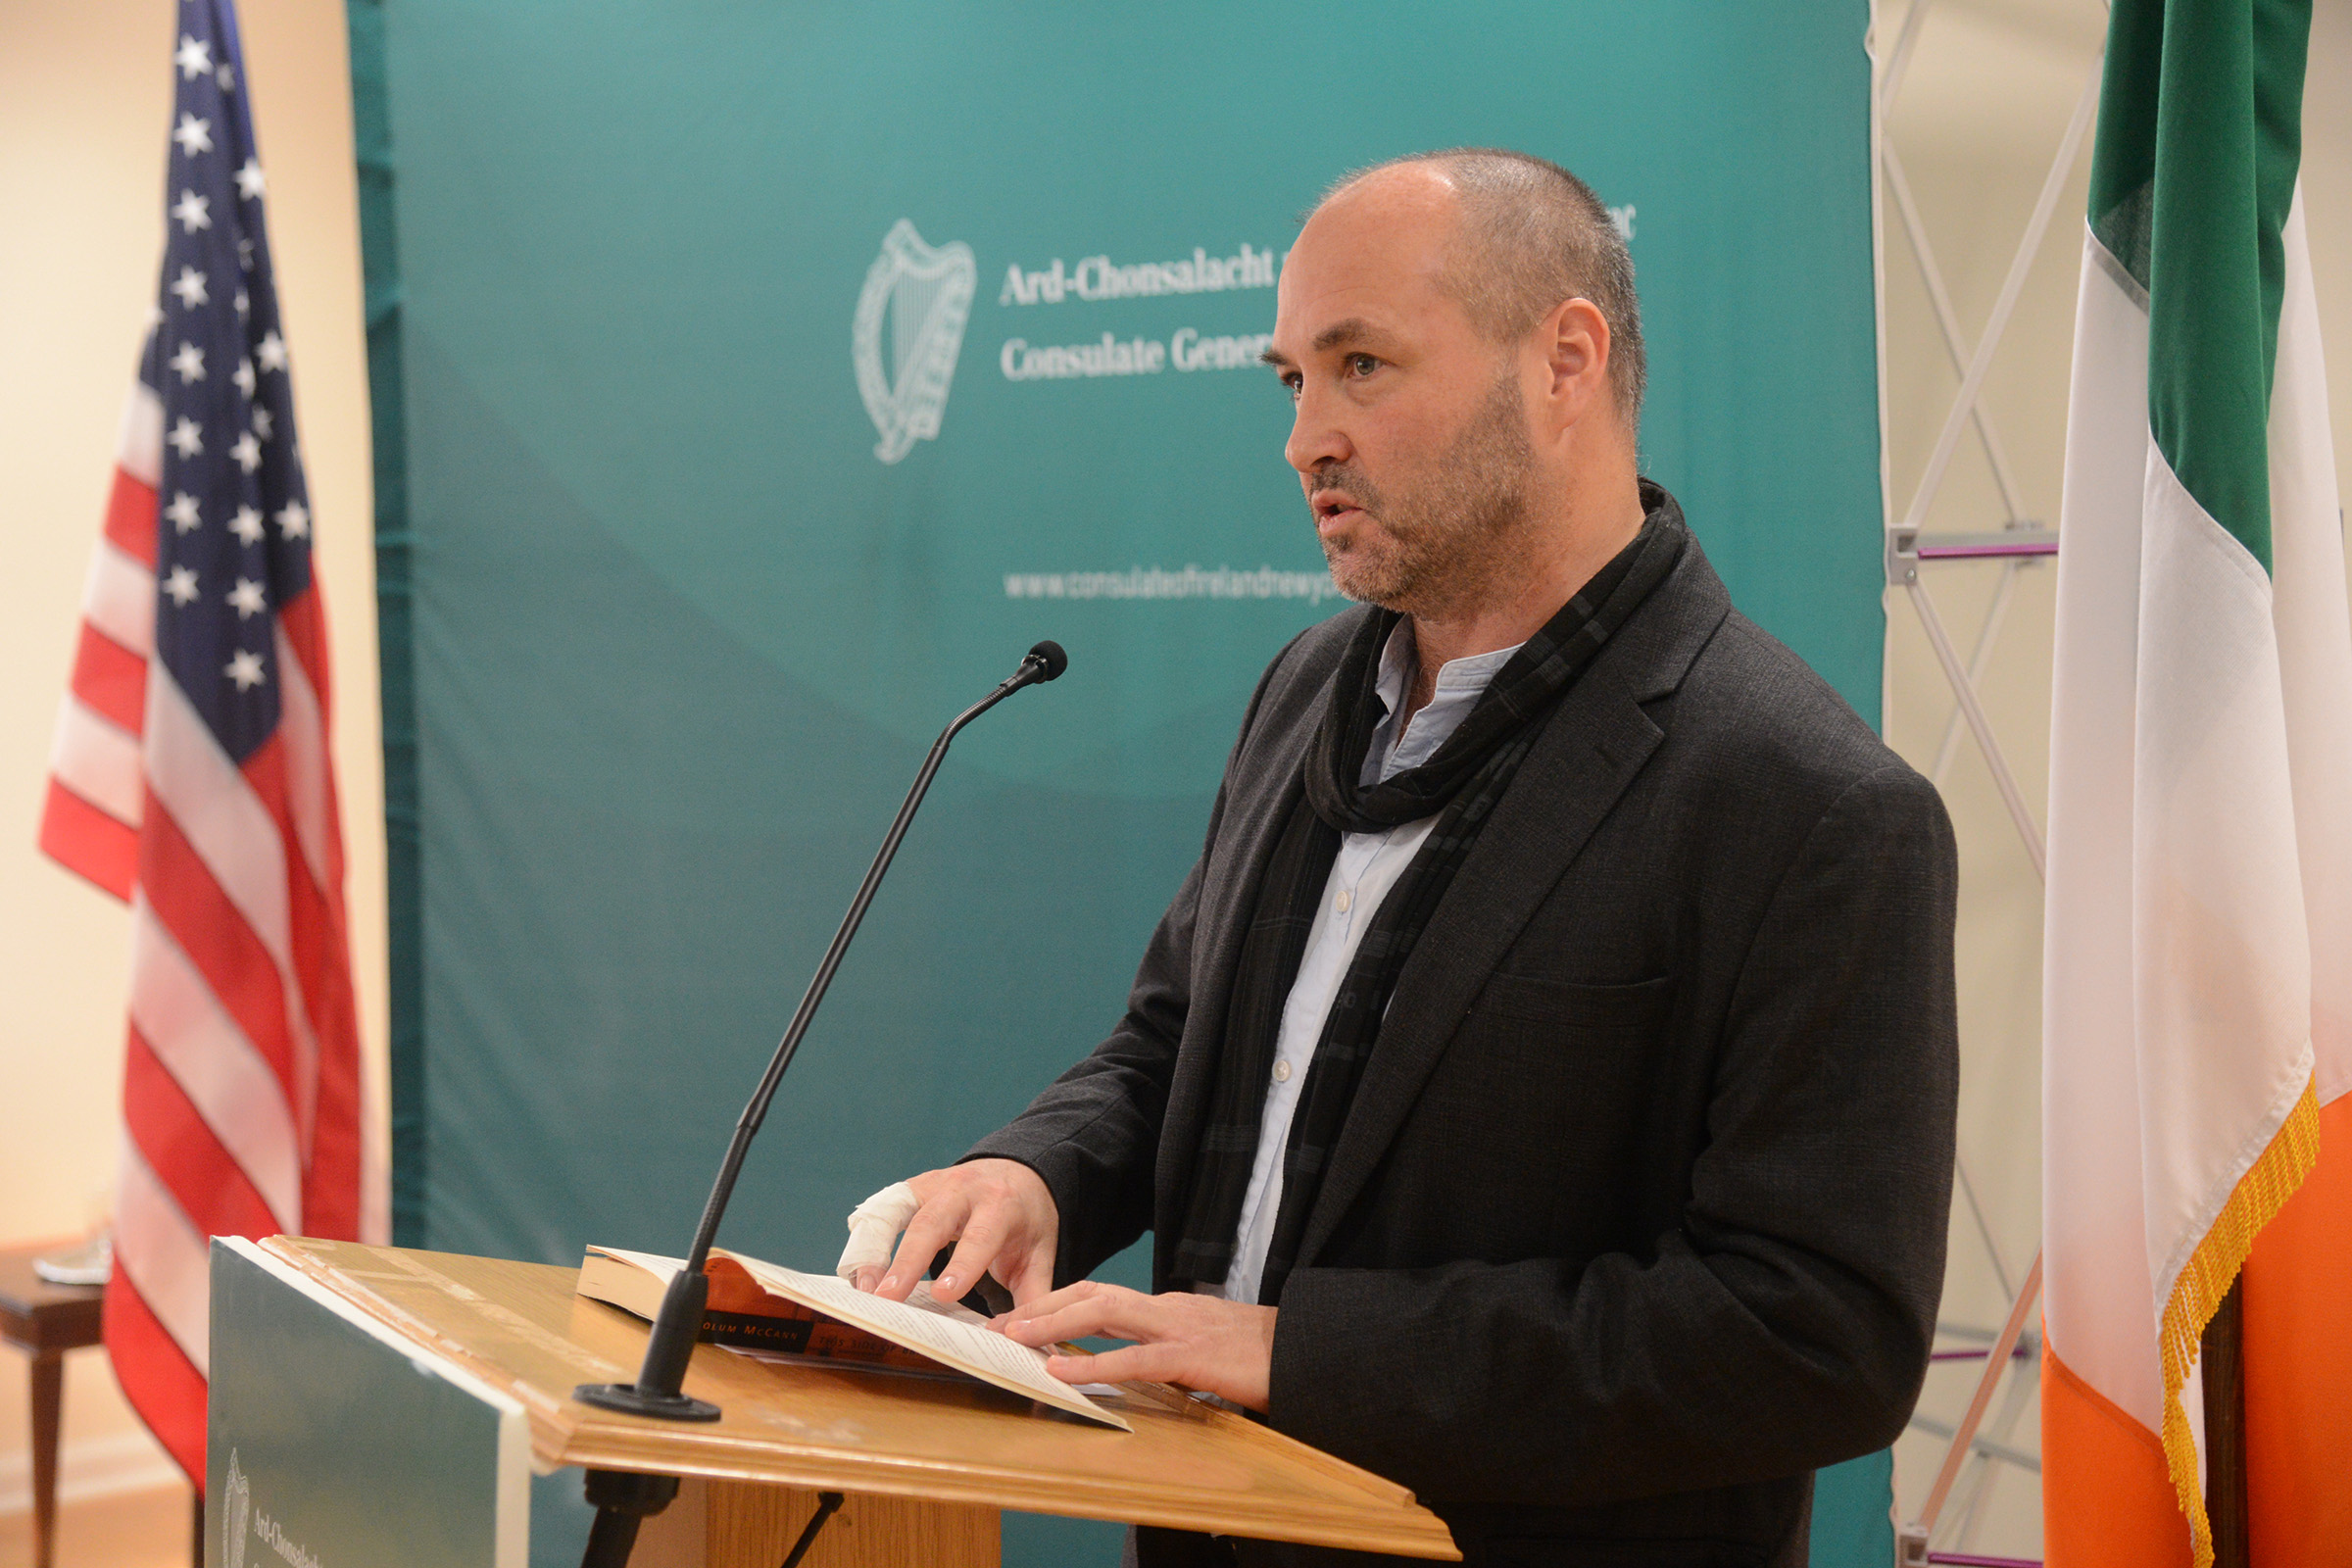 Author Colum McCann reads from one of his novels at the launch. (Photo: James Higgins)